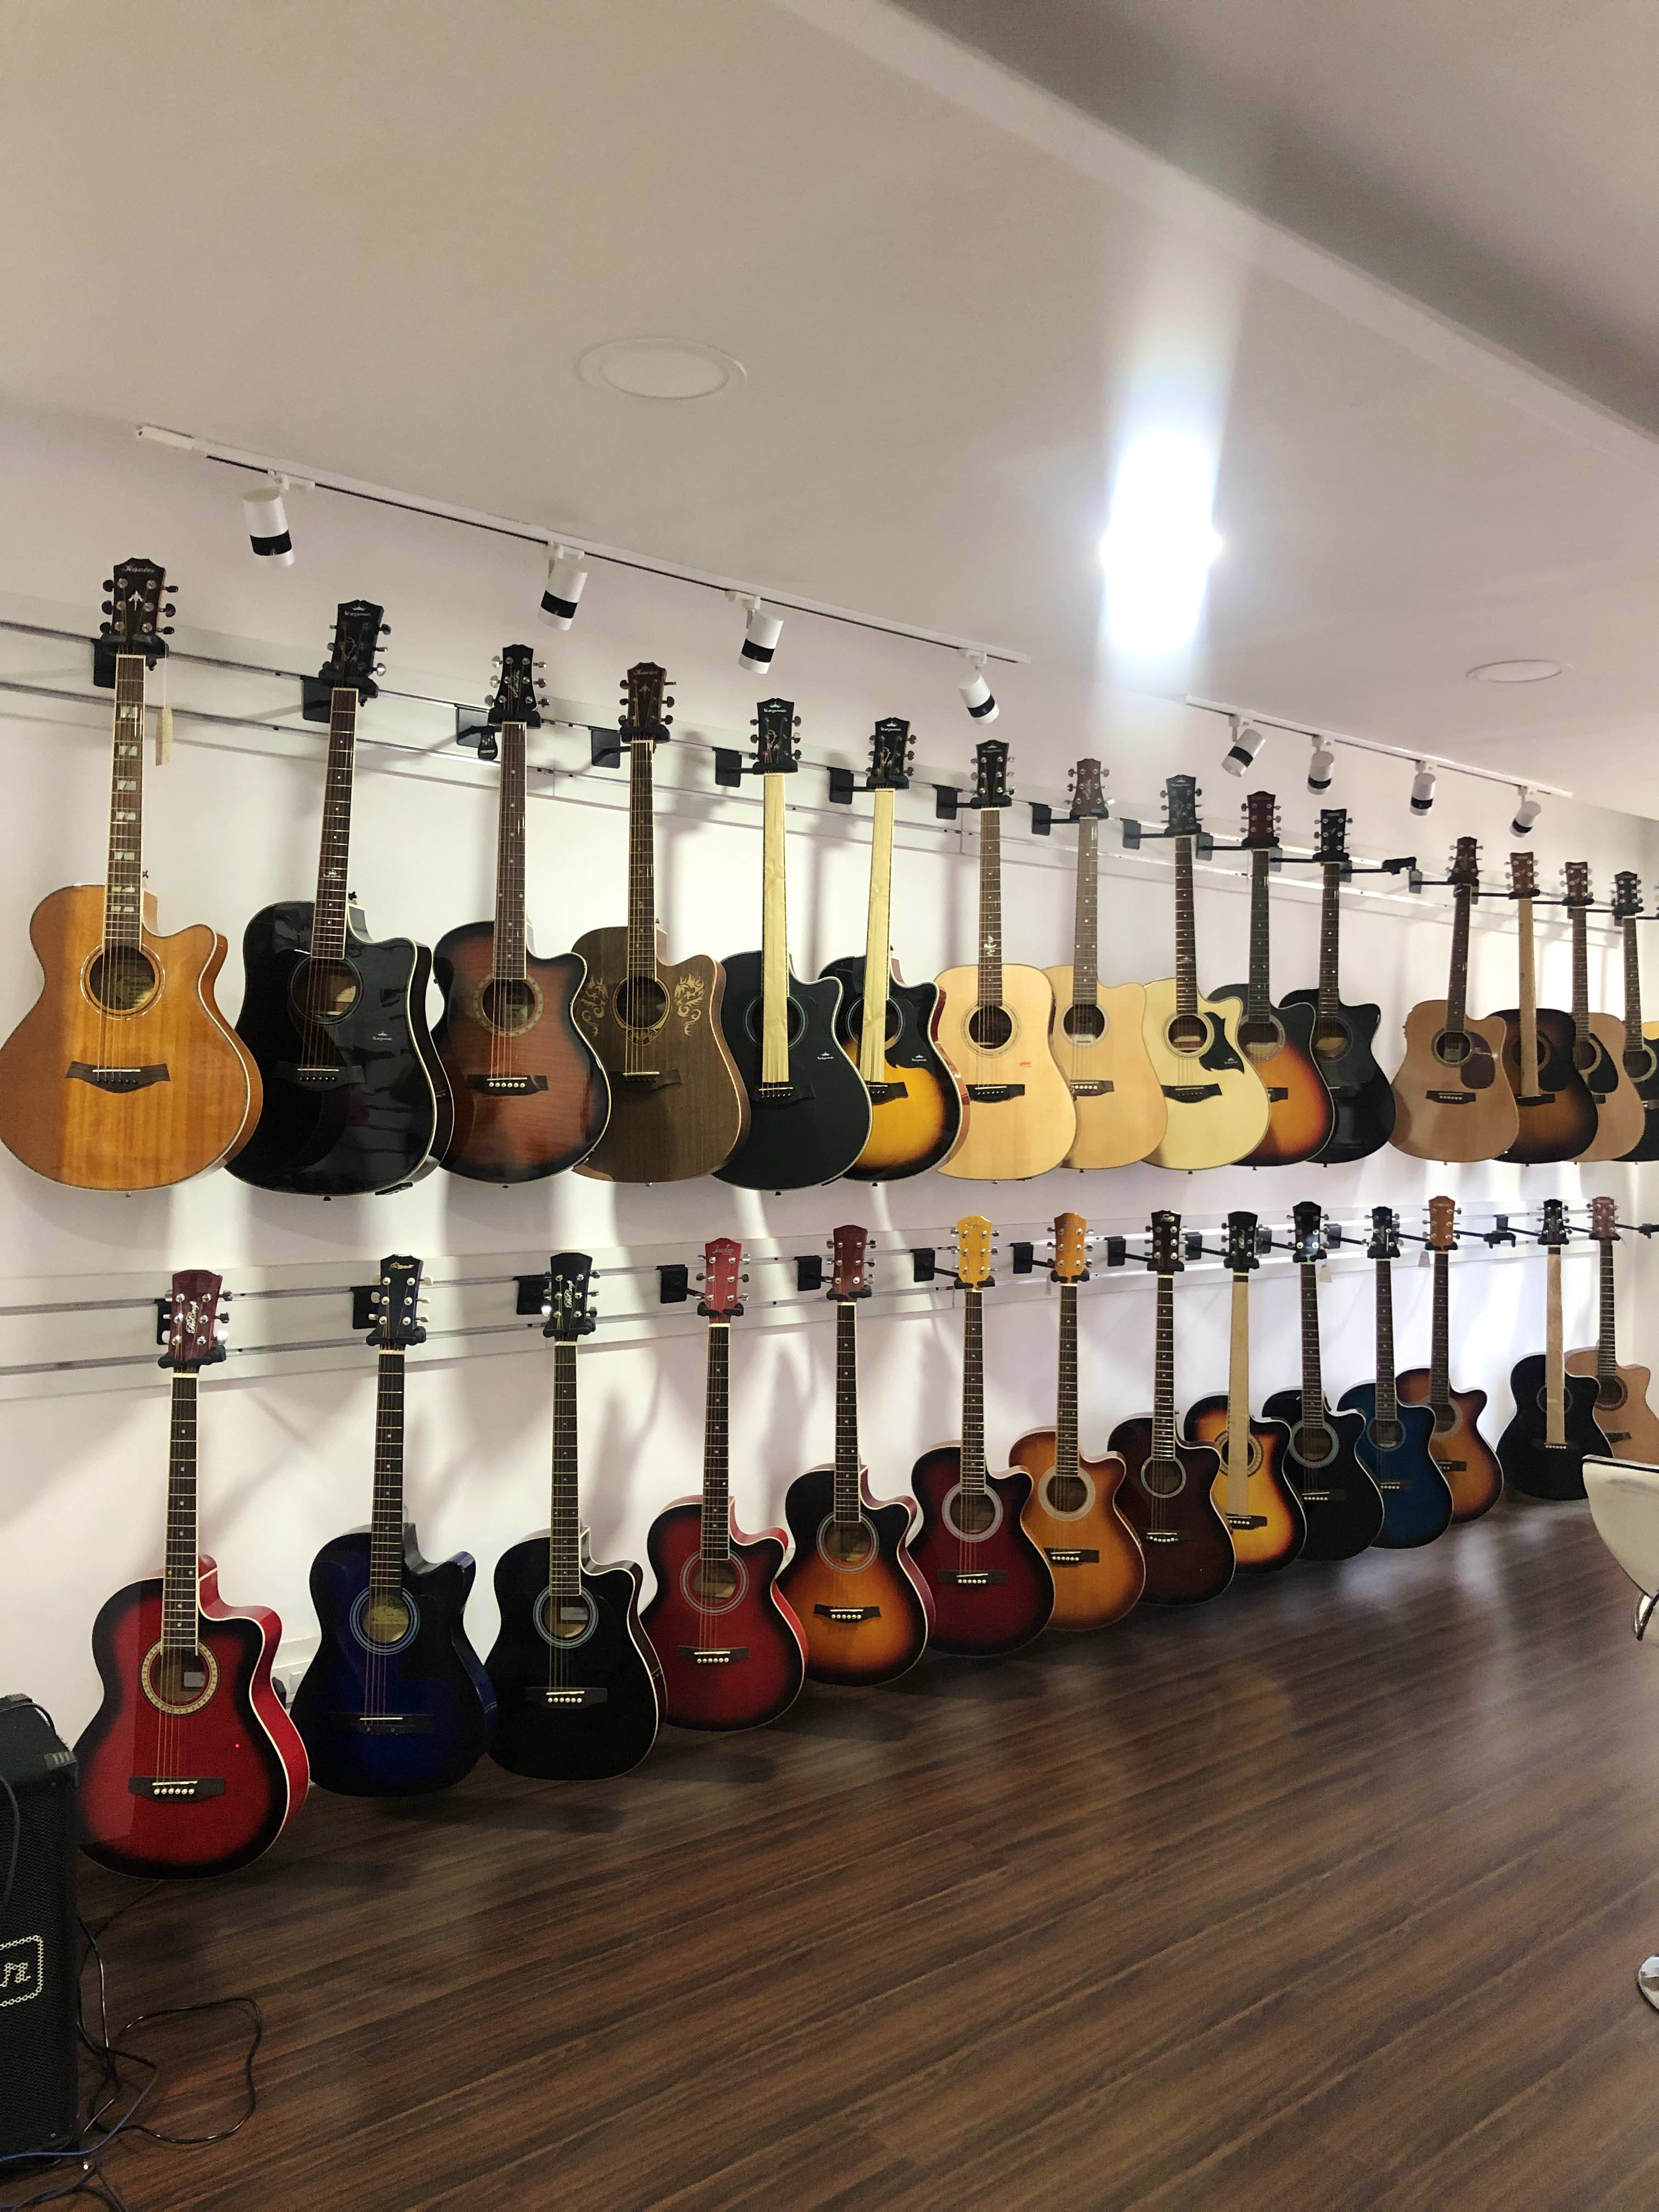 Guitar,String instrument,Plucked string instruments,String instrument,Musical instrument,Folk instrument,Collection